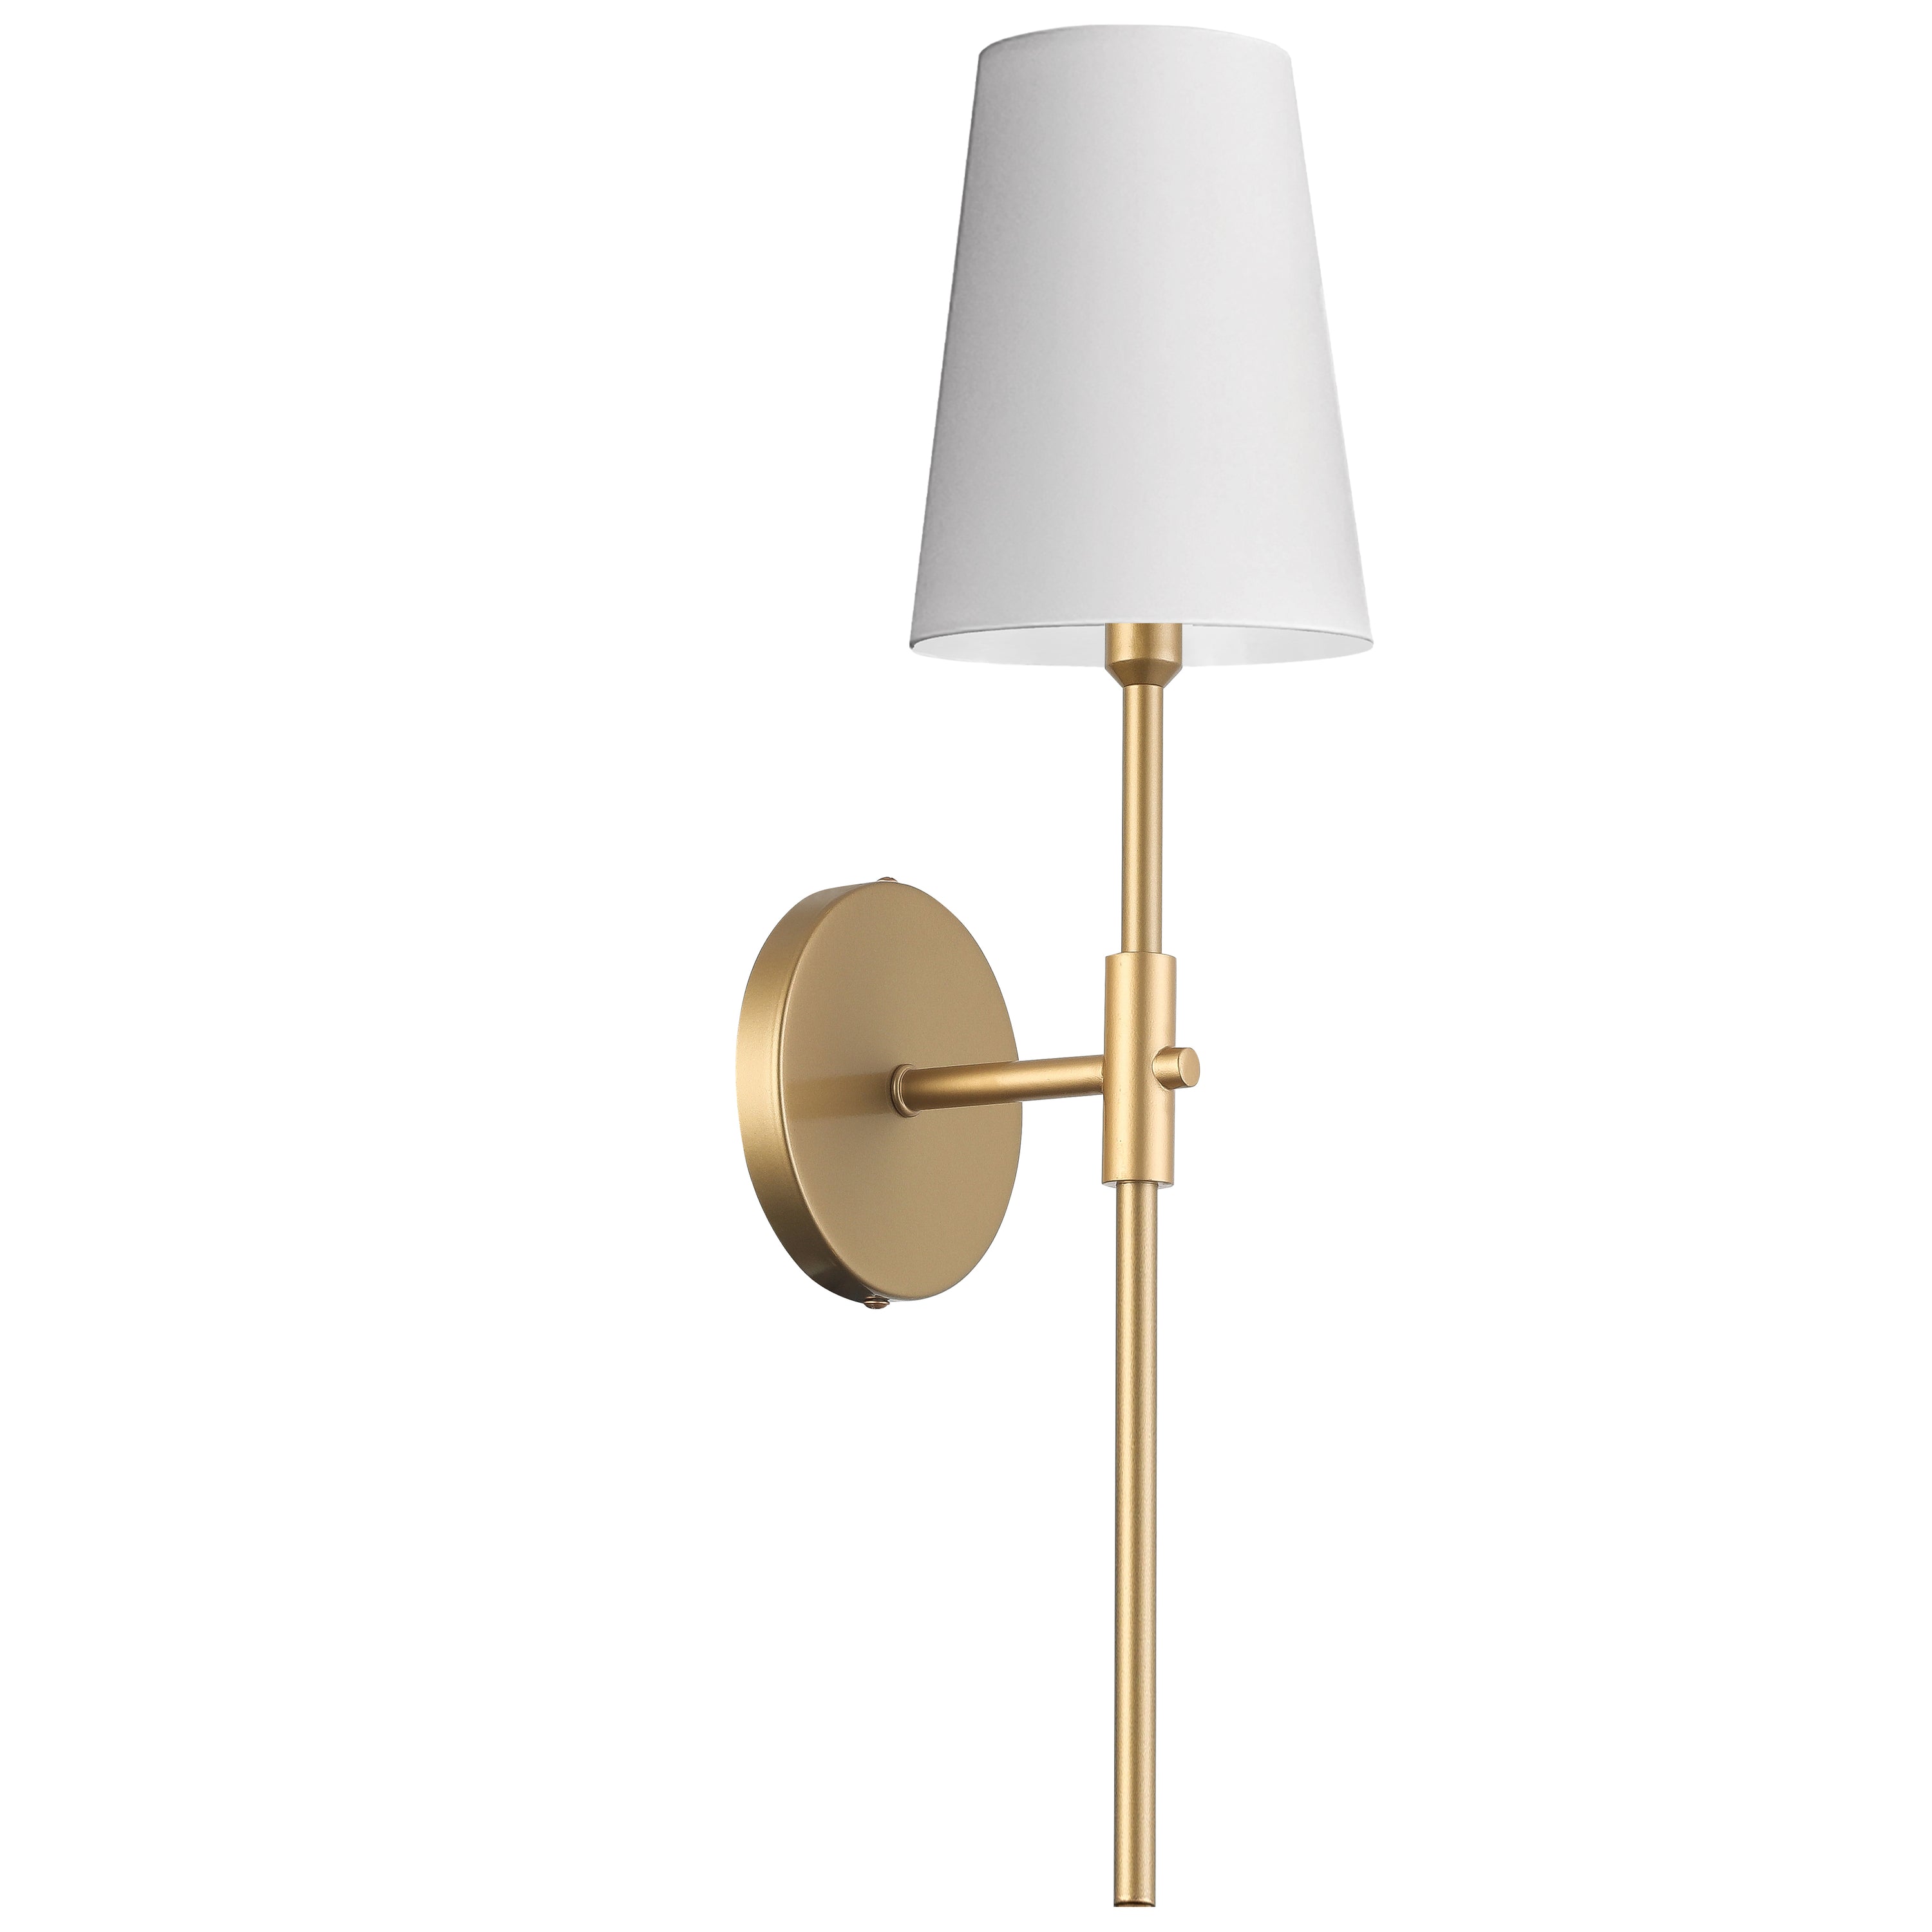 Dainolite CIN-211W-AGB-790 1 Light Incandescent Wall Satin Chrome Aged Brass with White Shade